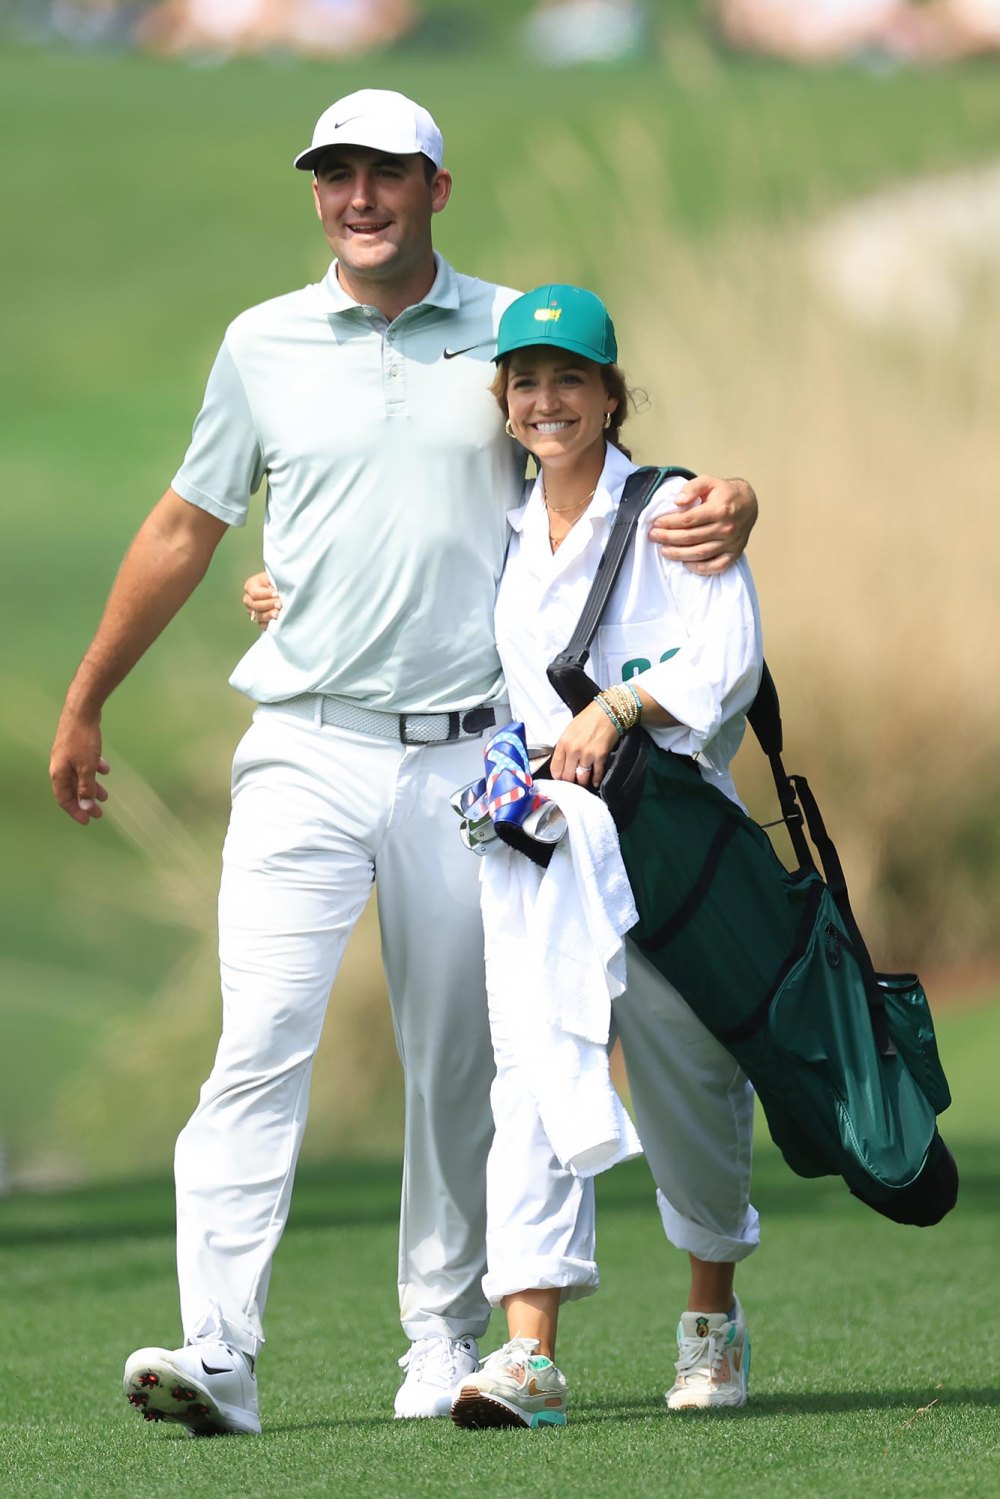 Scottie Scheffeler ‘Coming Home’ to Pregnant Wife Meredith After Masters Win- ‘I Love You’